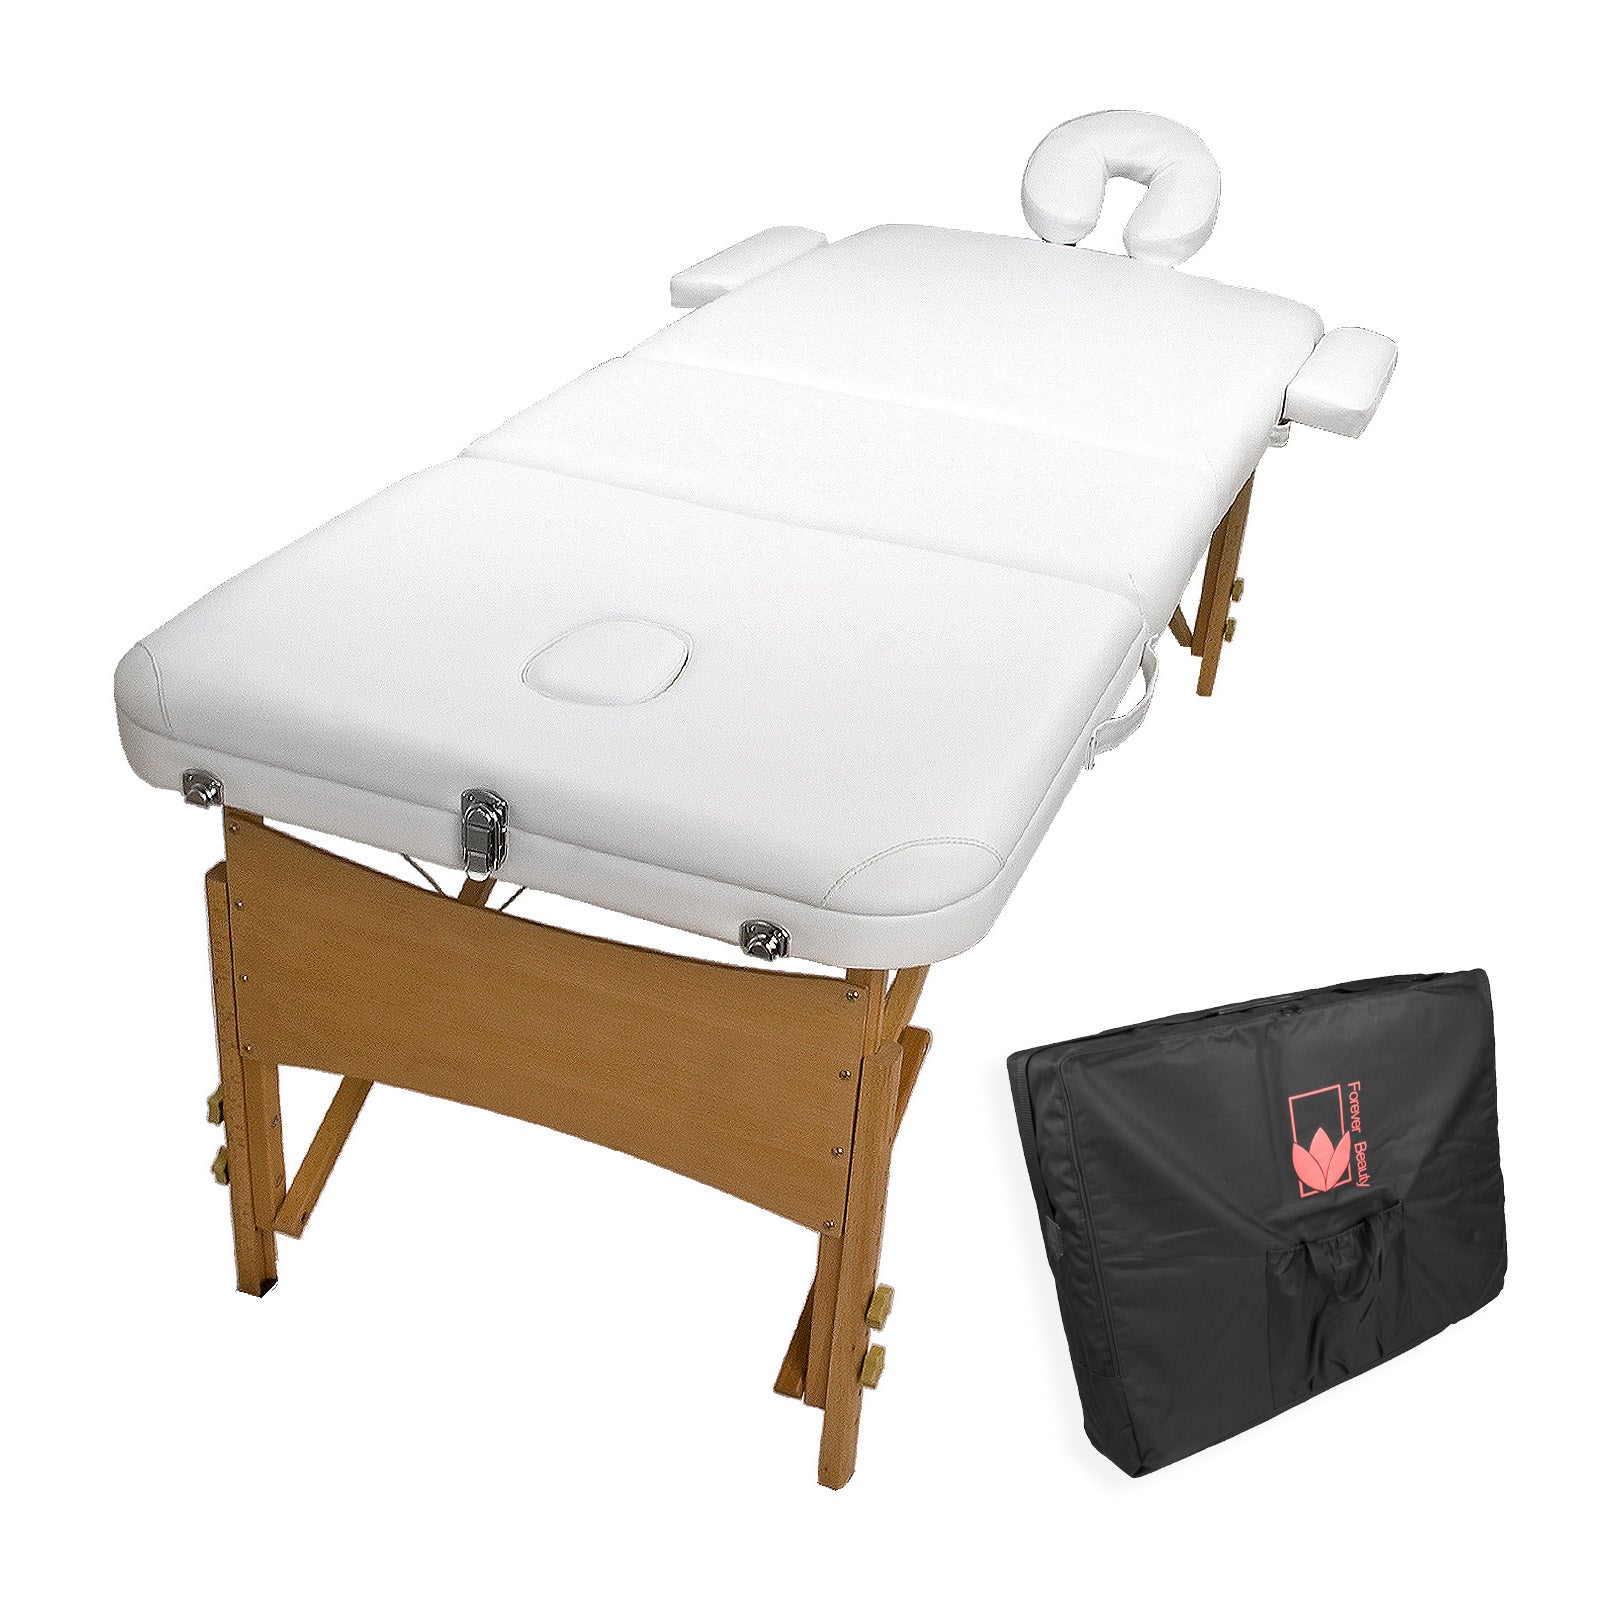 Forever Beauty White Portable Beauty Massage Table Bed 3 Fold 70cm Wooden - SILBERSHELL